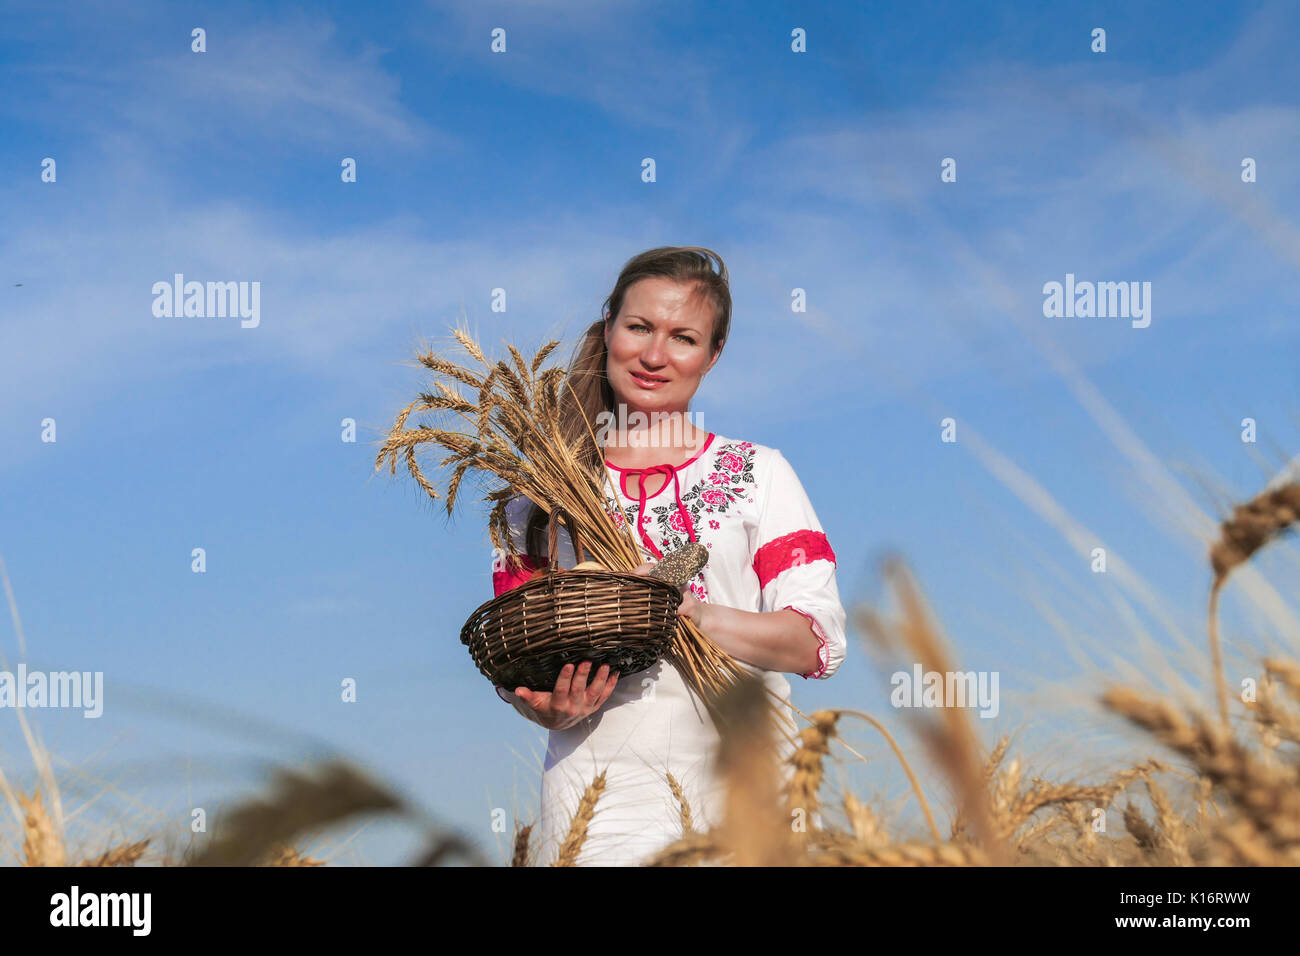 Young attractive woman in beatiful natural dress walking with basket with bread in the golden wheat field during the sunshine. Stock Photo